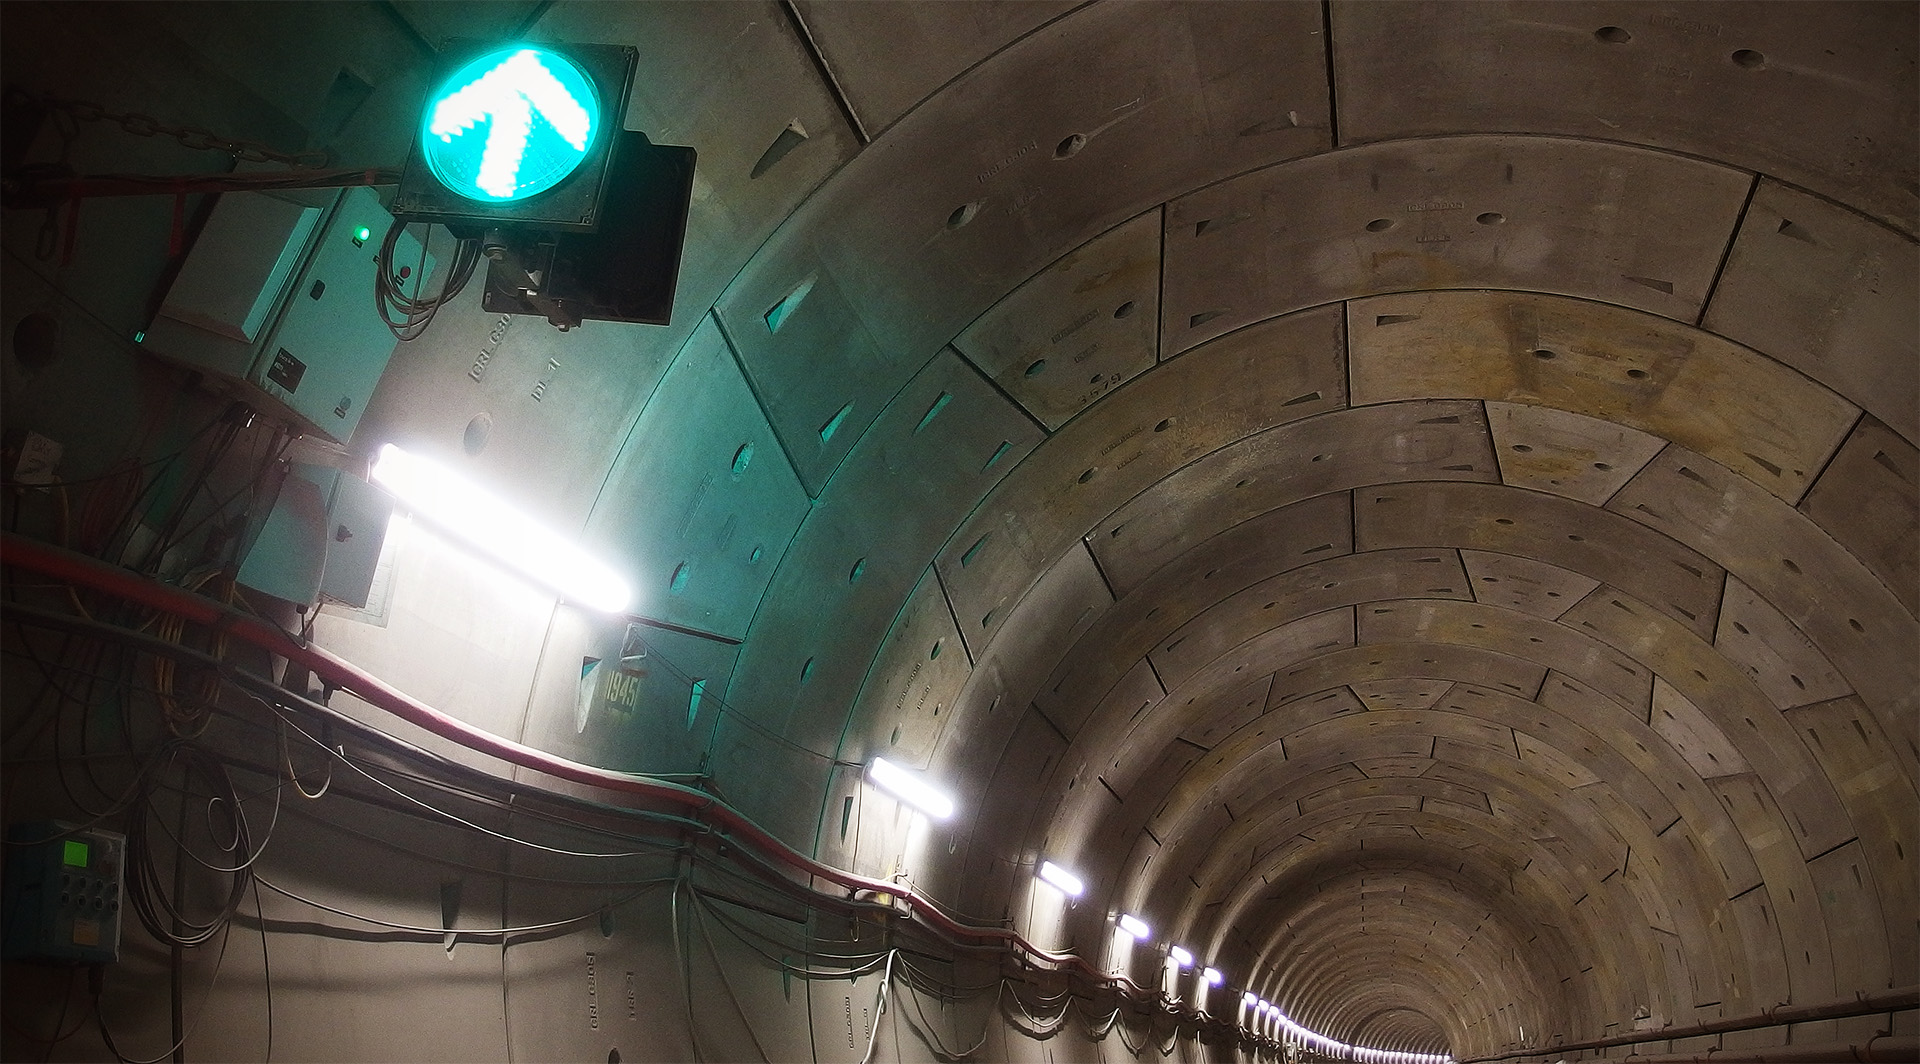 A green light with an arrow is illuminated and mounted on the tunnel wall